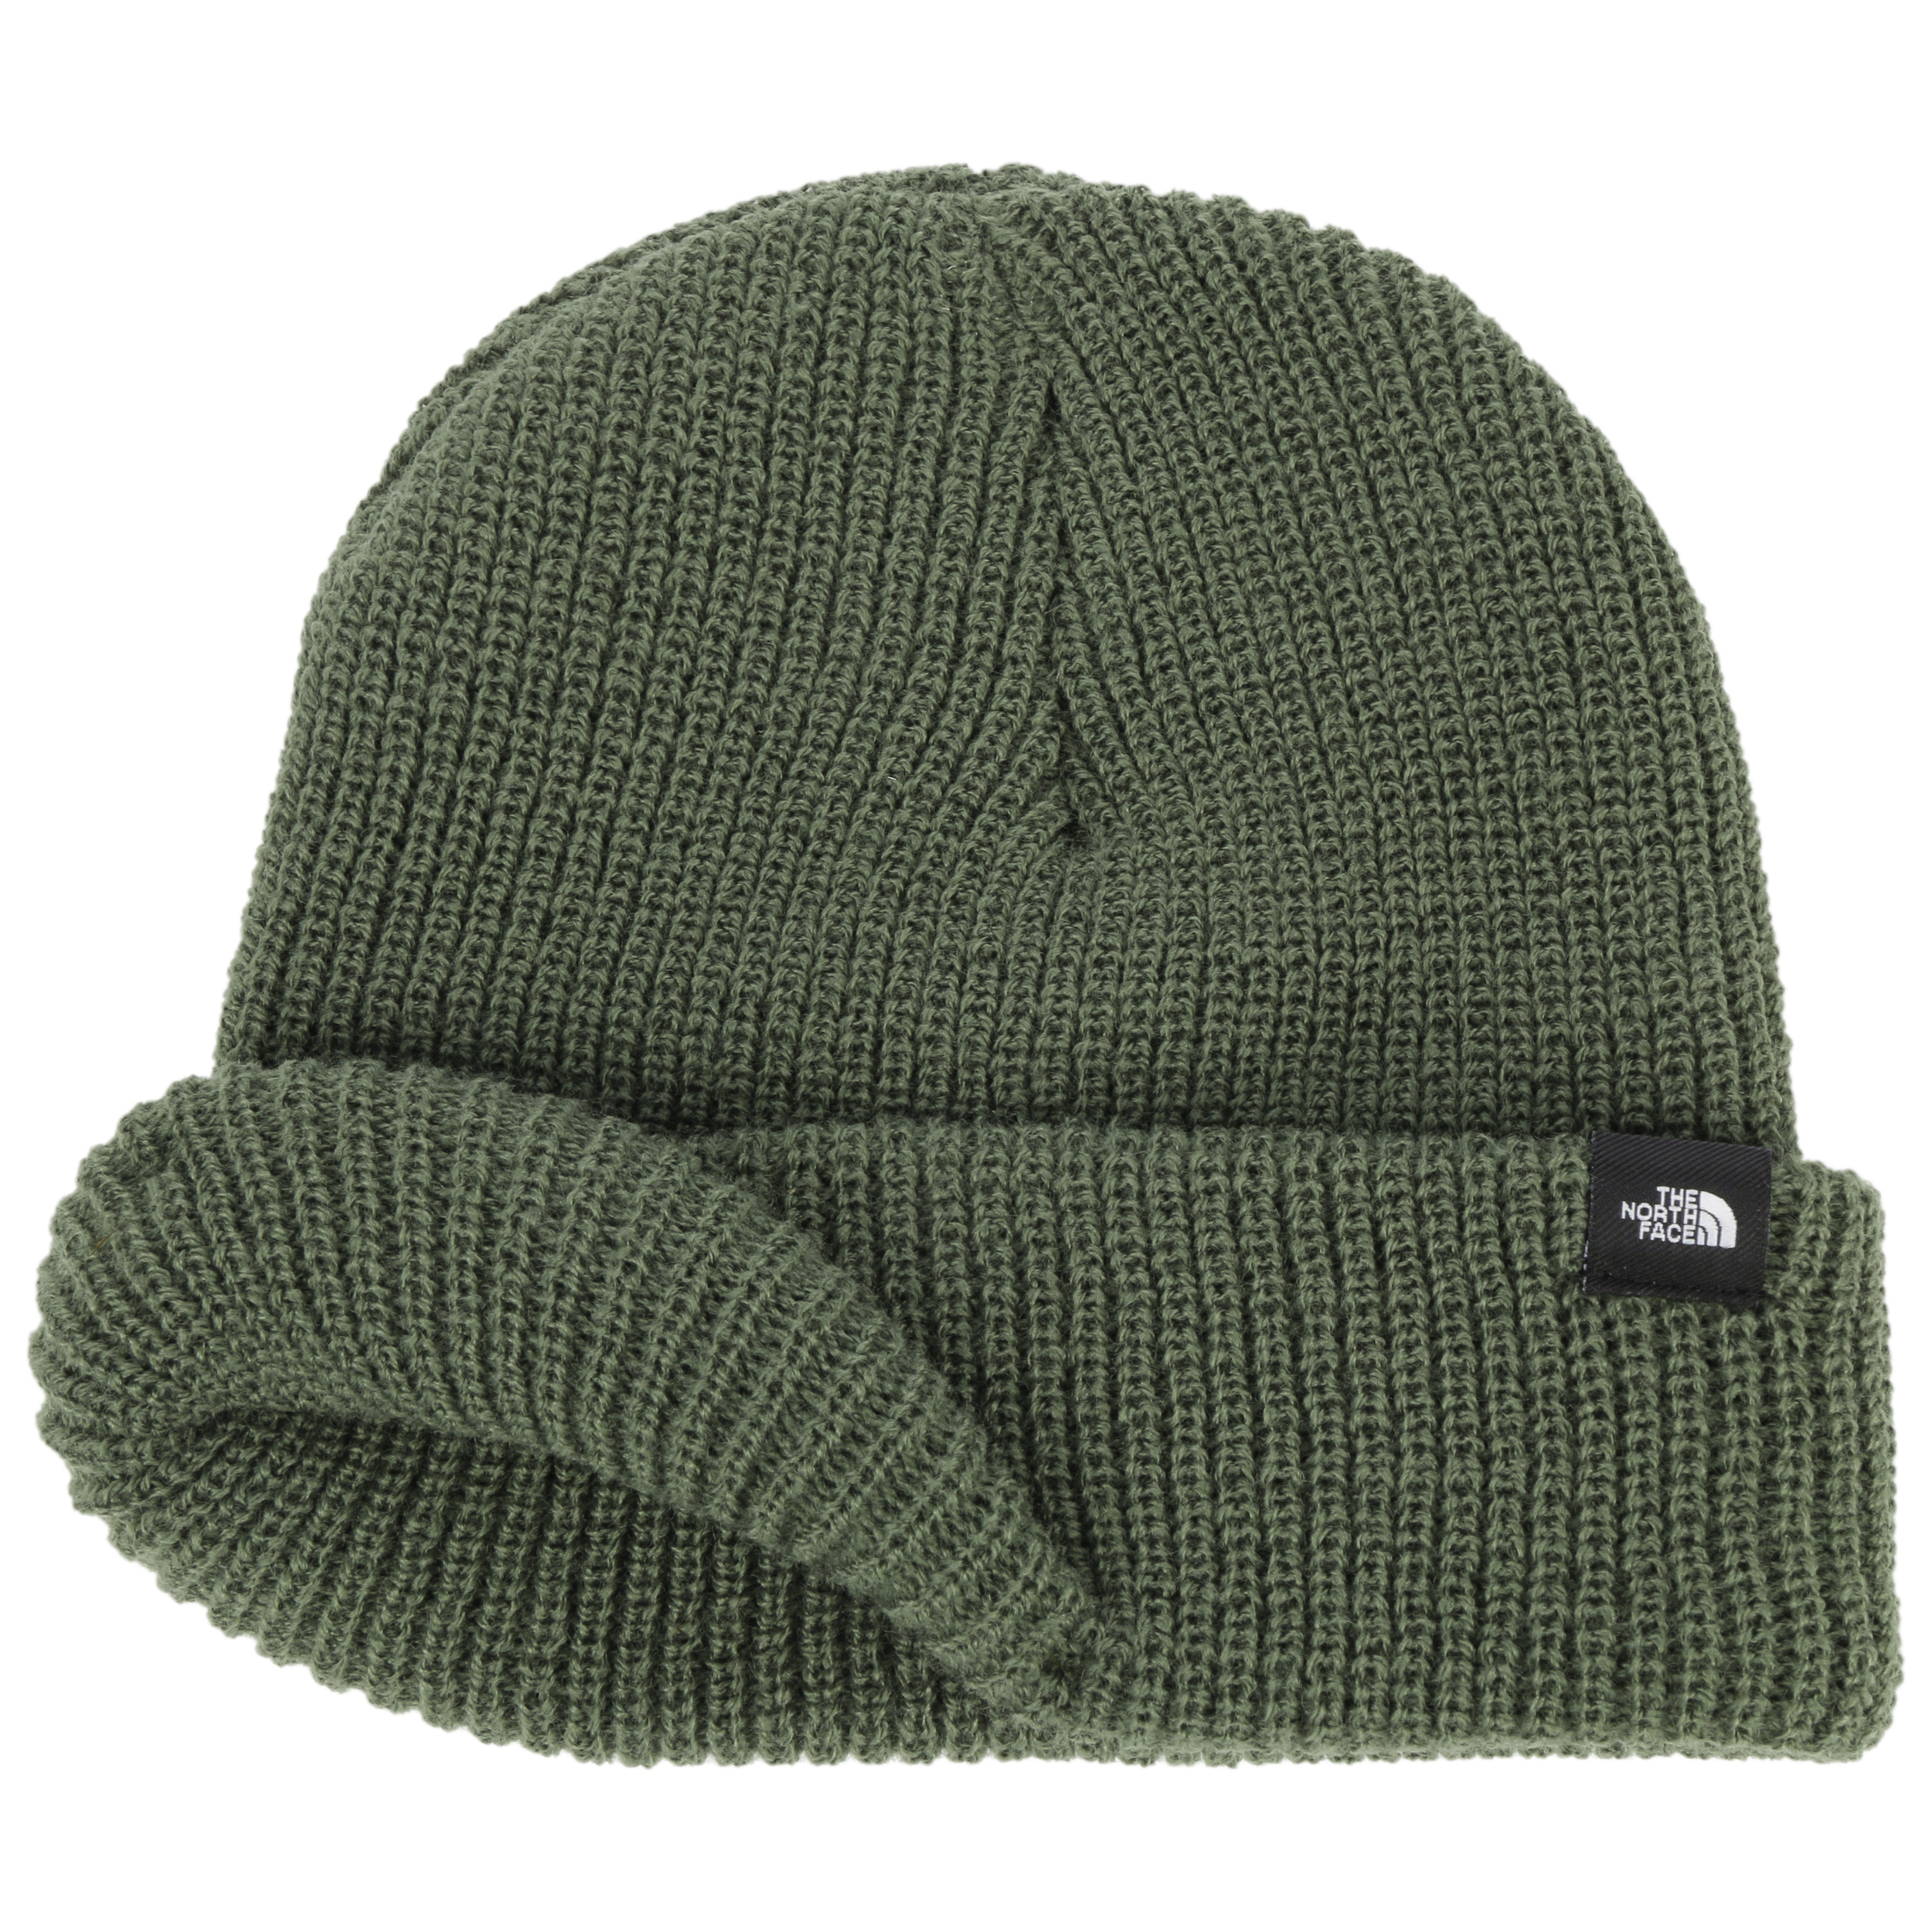 TNF Free Beanie Hat by The North Face 